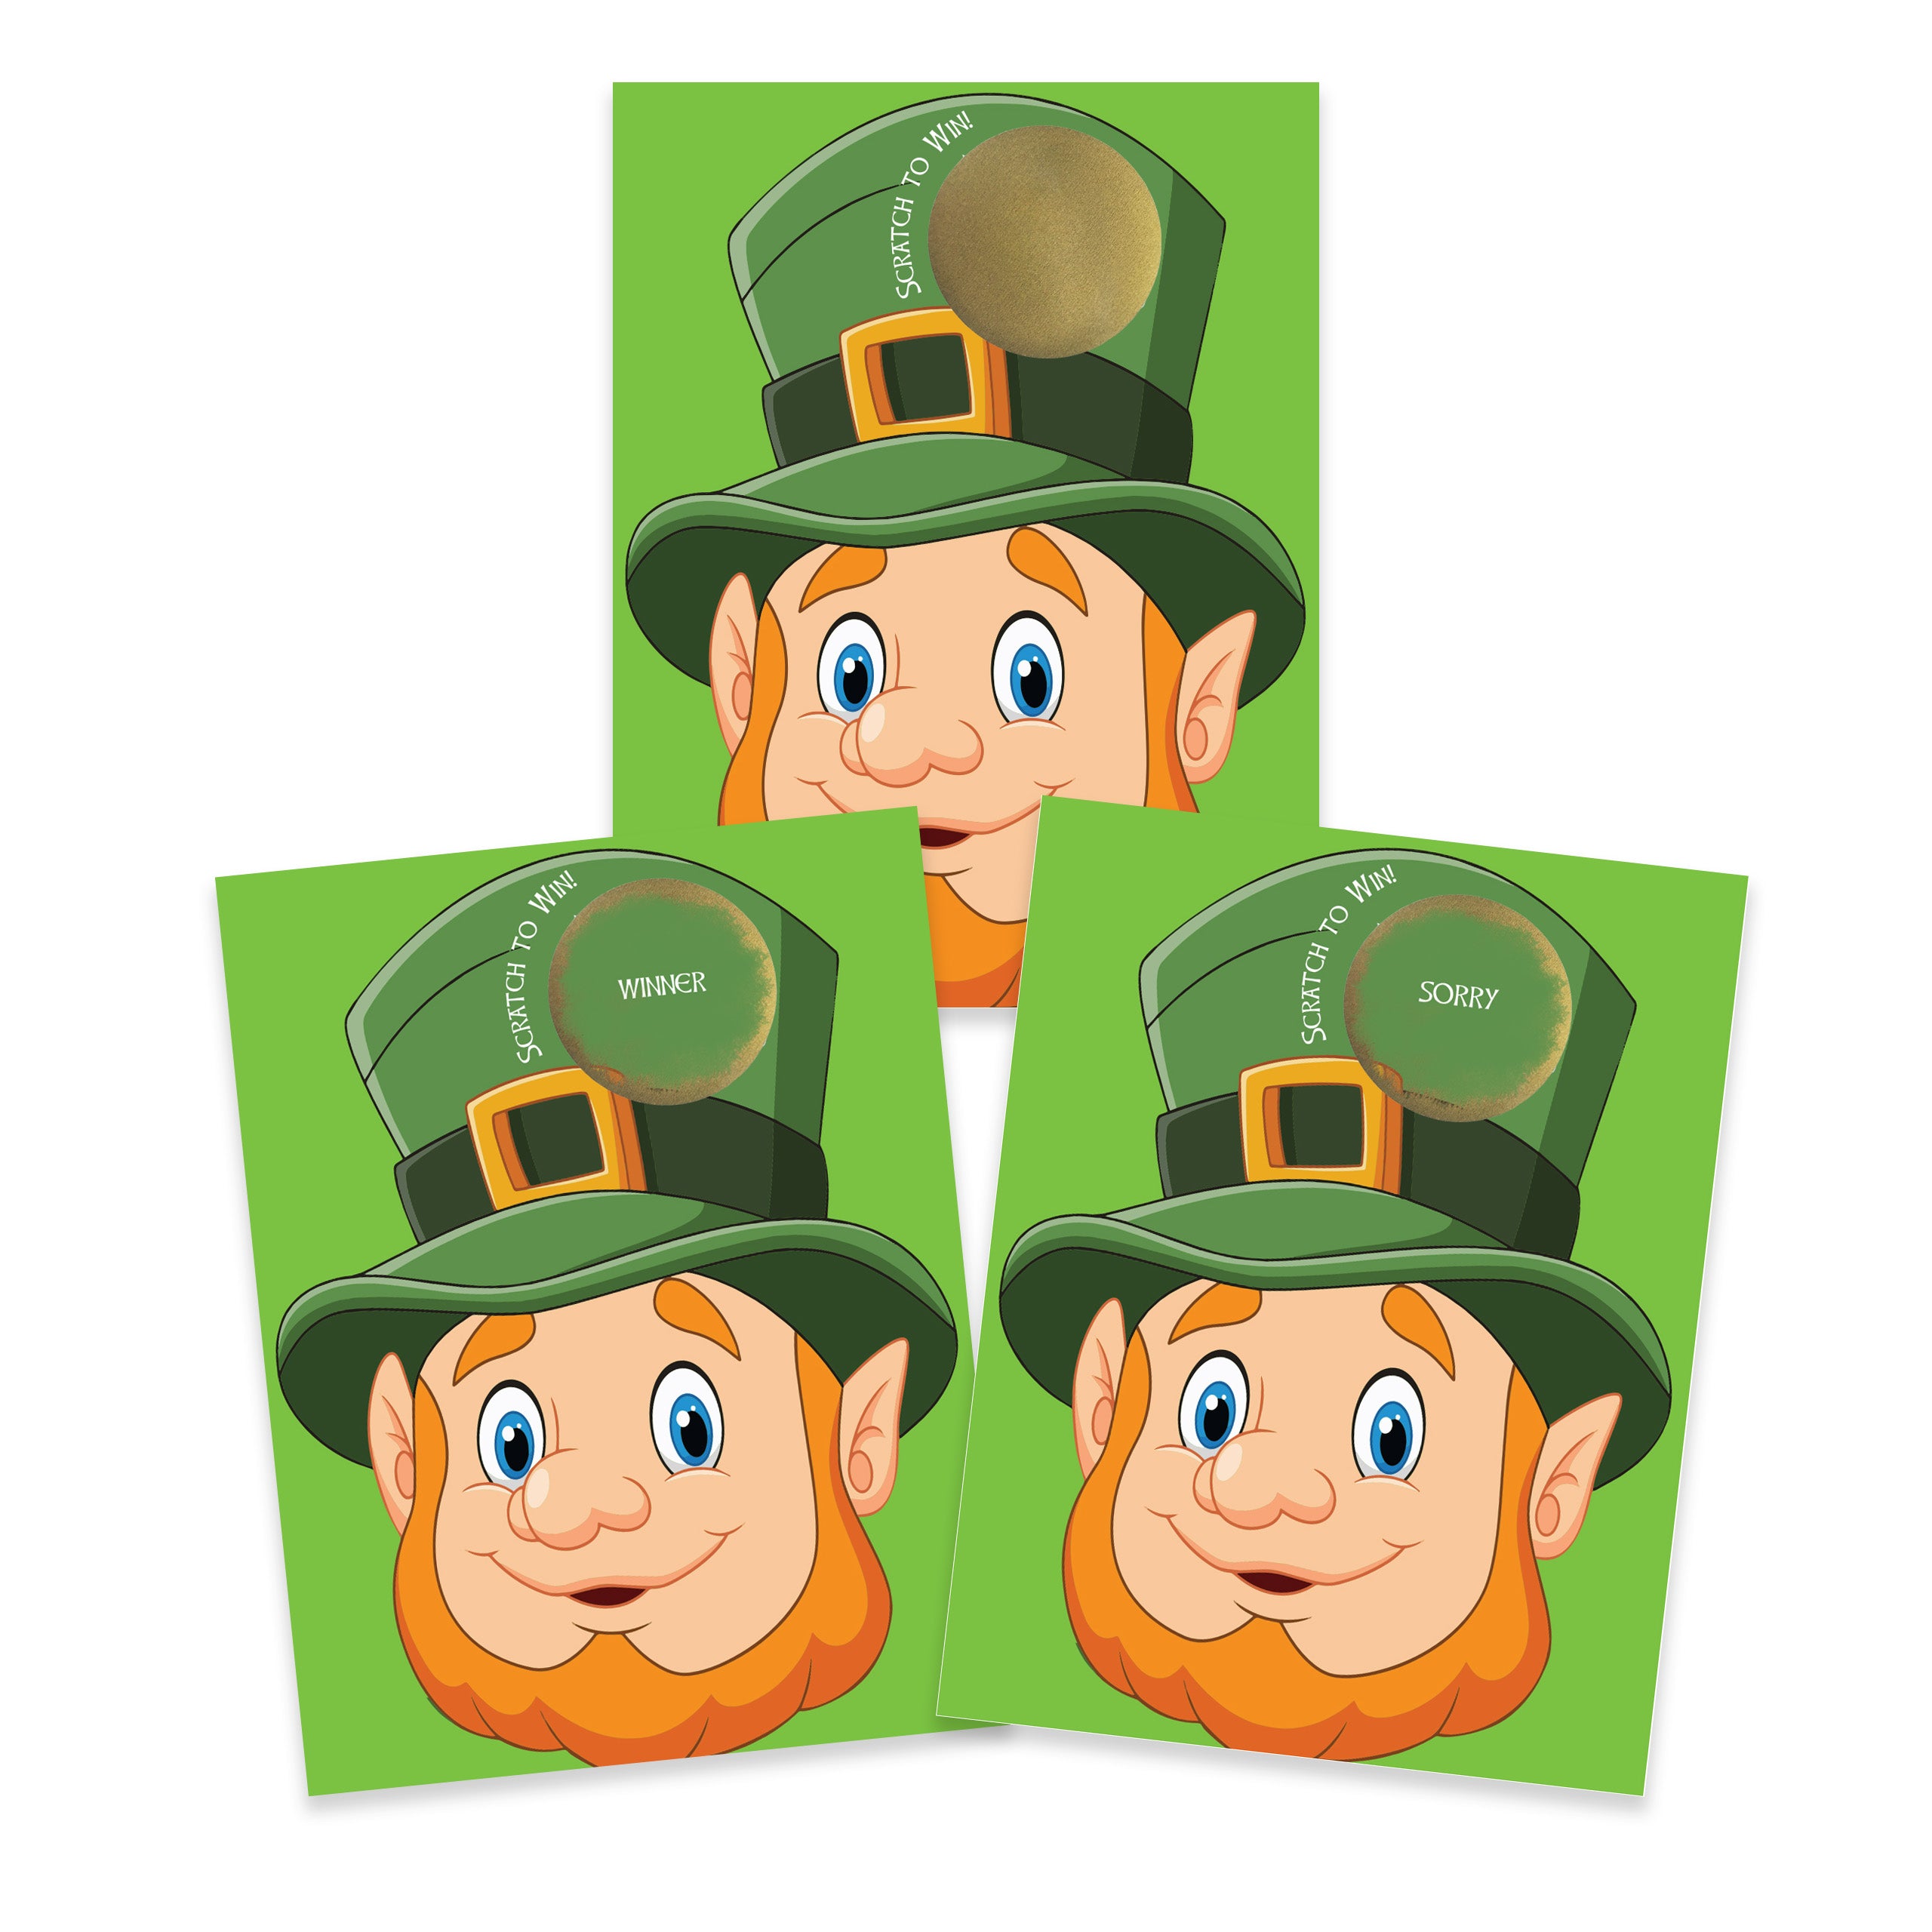 St. Patrick's Day Leprechaun Scratch Off Game 26 Pack - 2 Winning and 24 Non-Winning Cards - My Scratch Offs